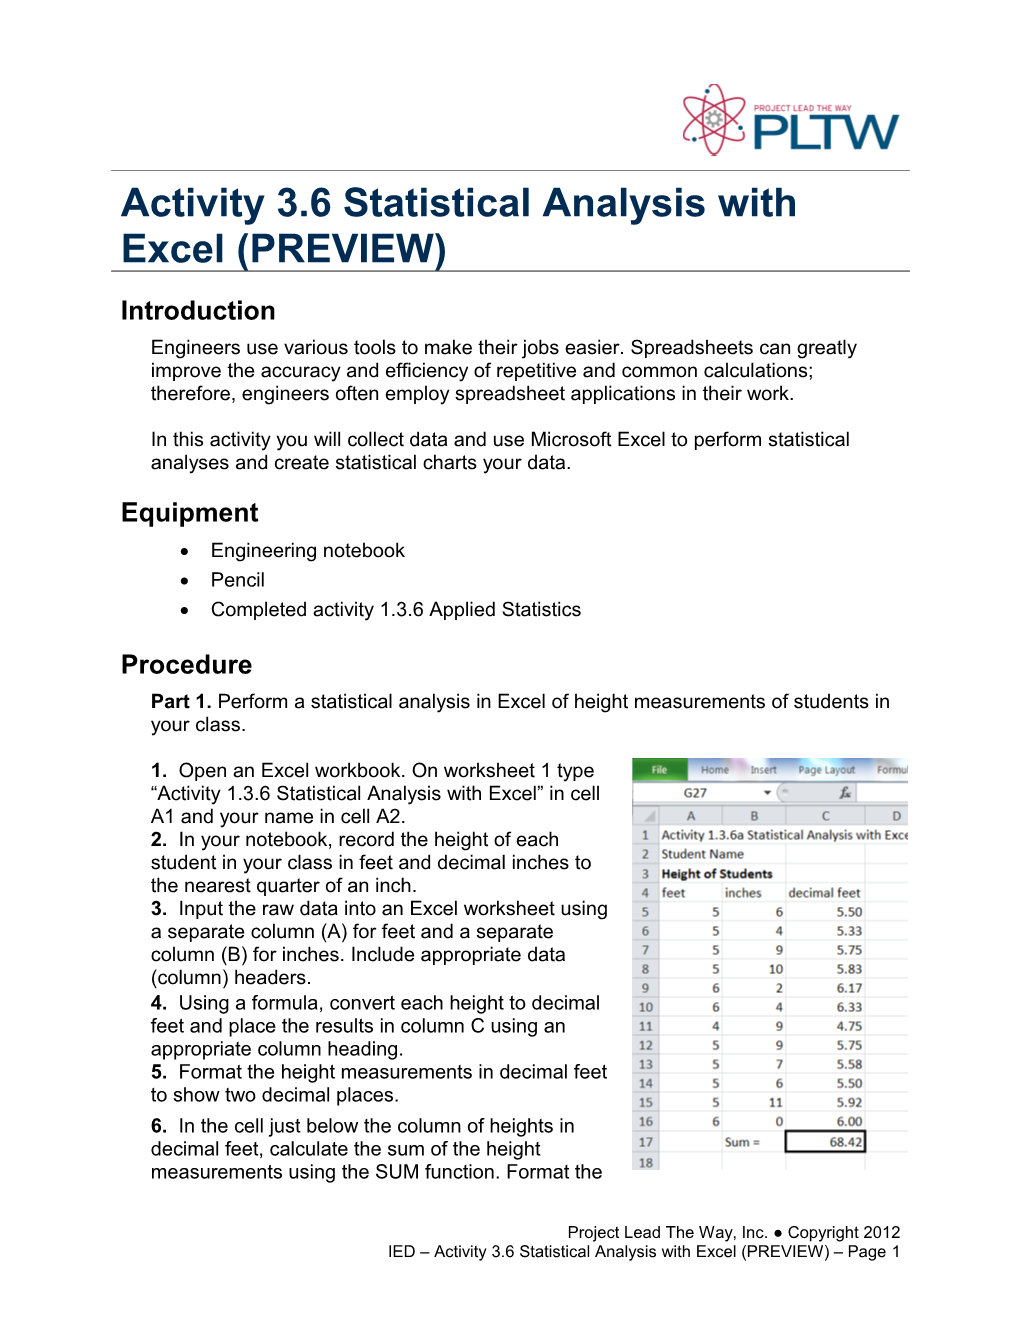 Activity 3.6 Statistical Analysis with Excel (PREVIEW)